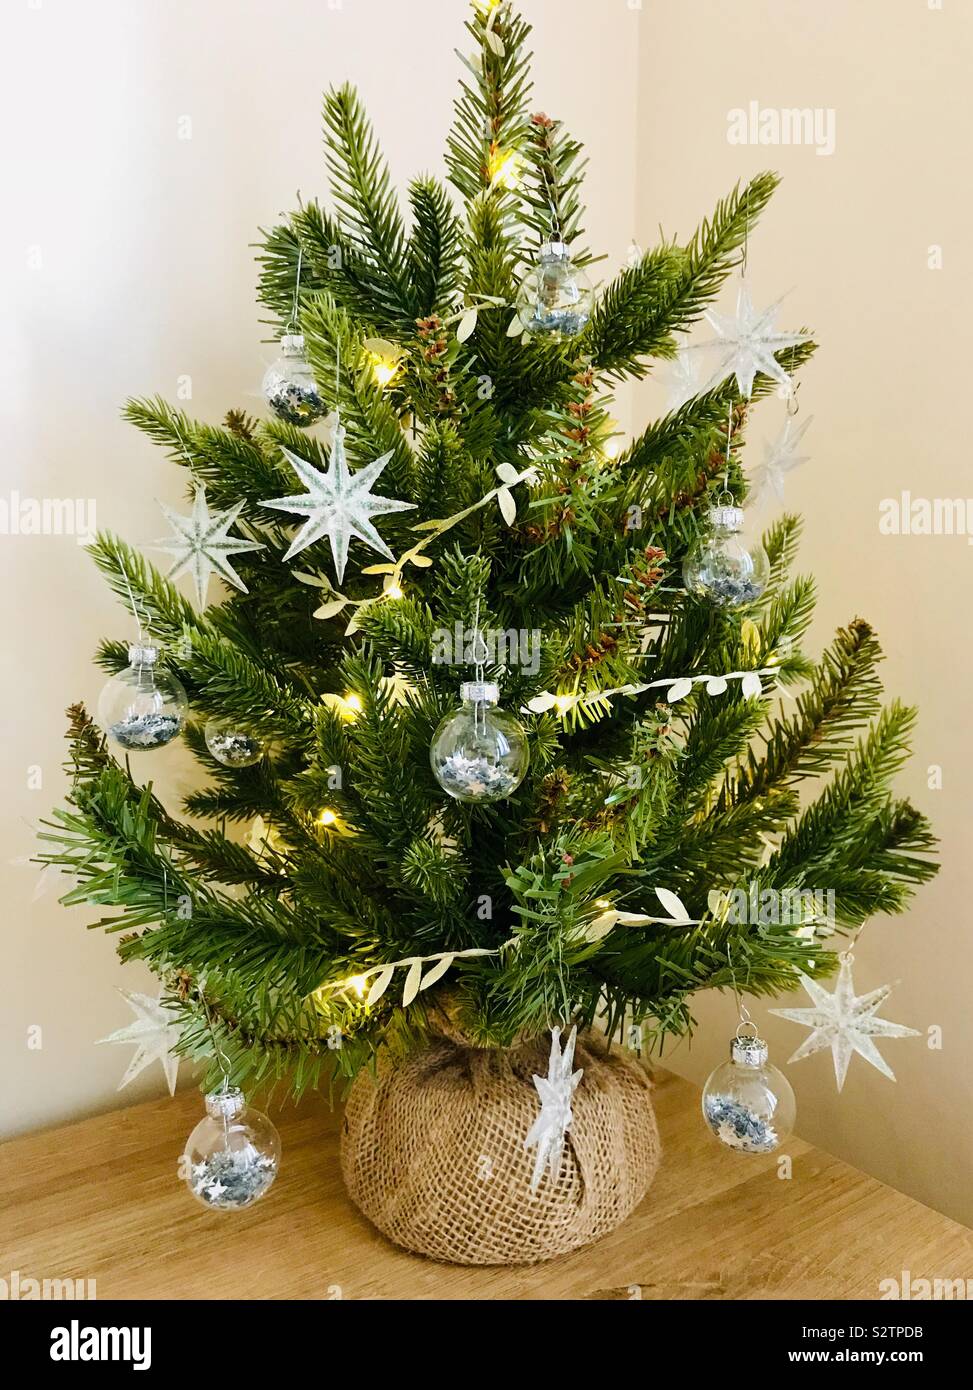 Small Decorated Artificial Christmas Tree Stock Photo Alamy